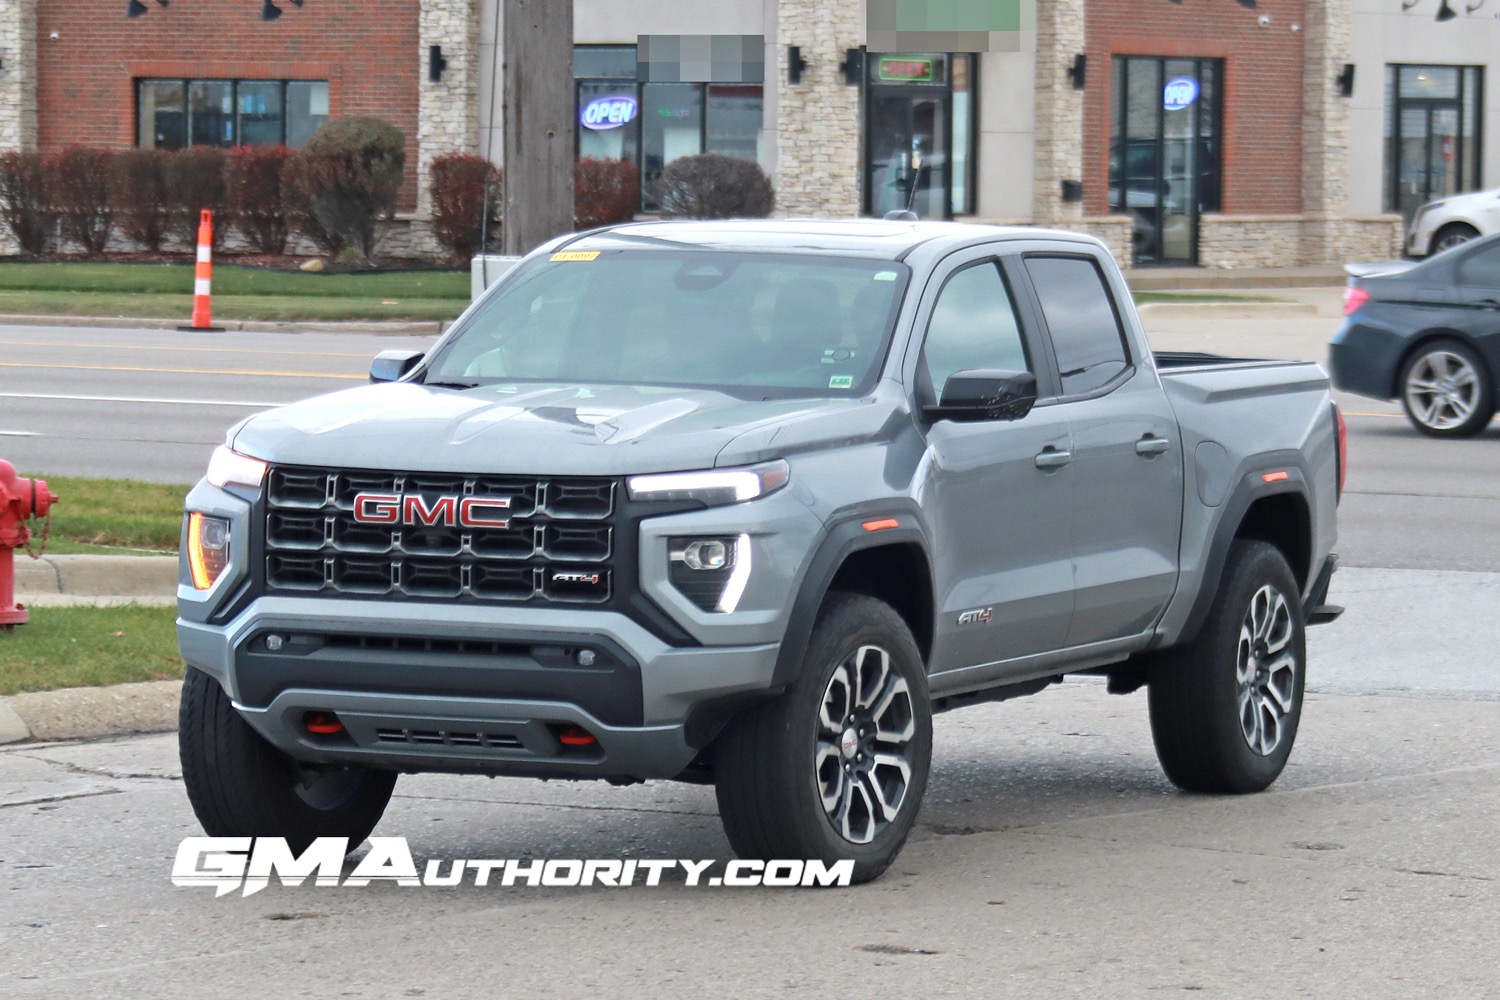 2023 GMC Canyon AT4 Sterling Metallic GXD 20 Inch Wheels RD5 Real World Photos Exterior3 Chevrolet Colorado Trail Boss Sterling Gray Metallic GXD First Real World Photos Exterior 001 